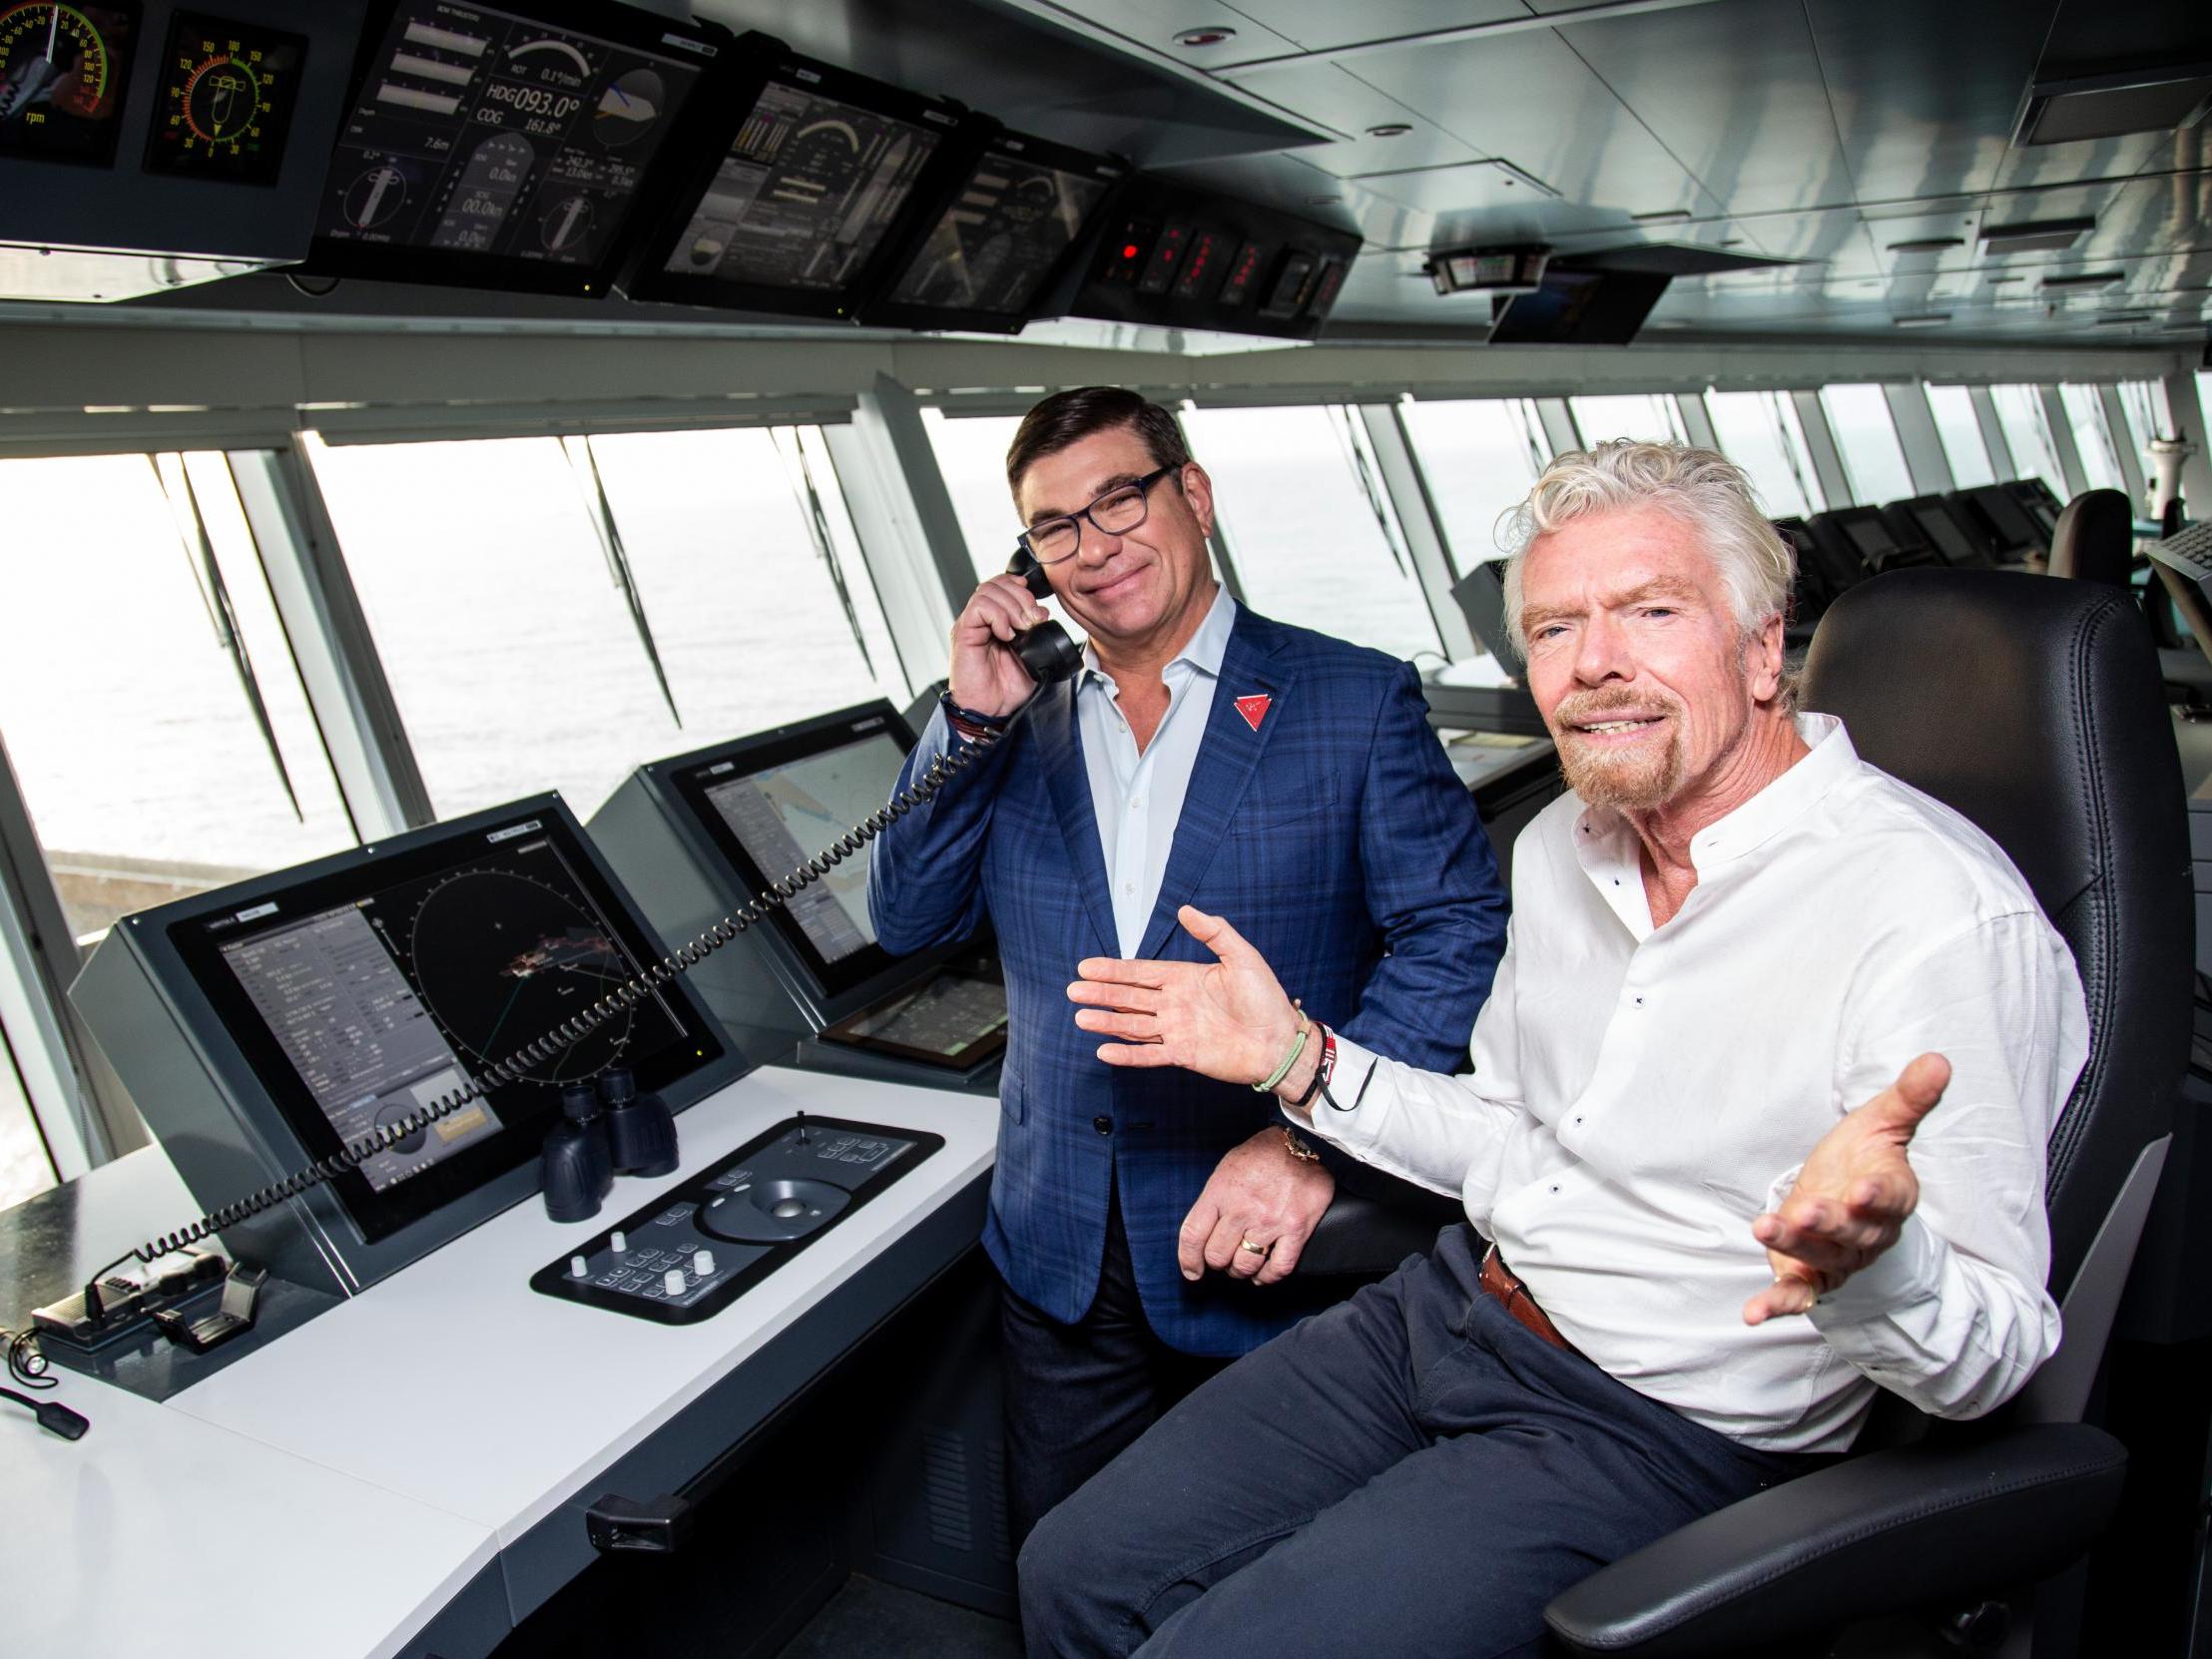 Related video: Sir Richard Branson says his Australia airline will survive